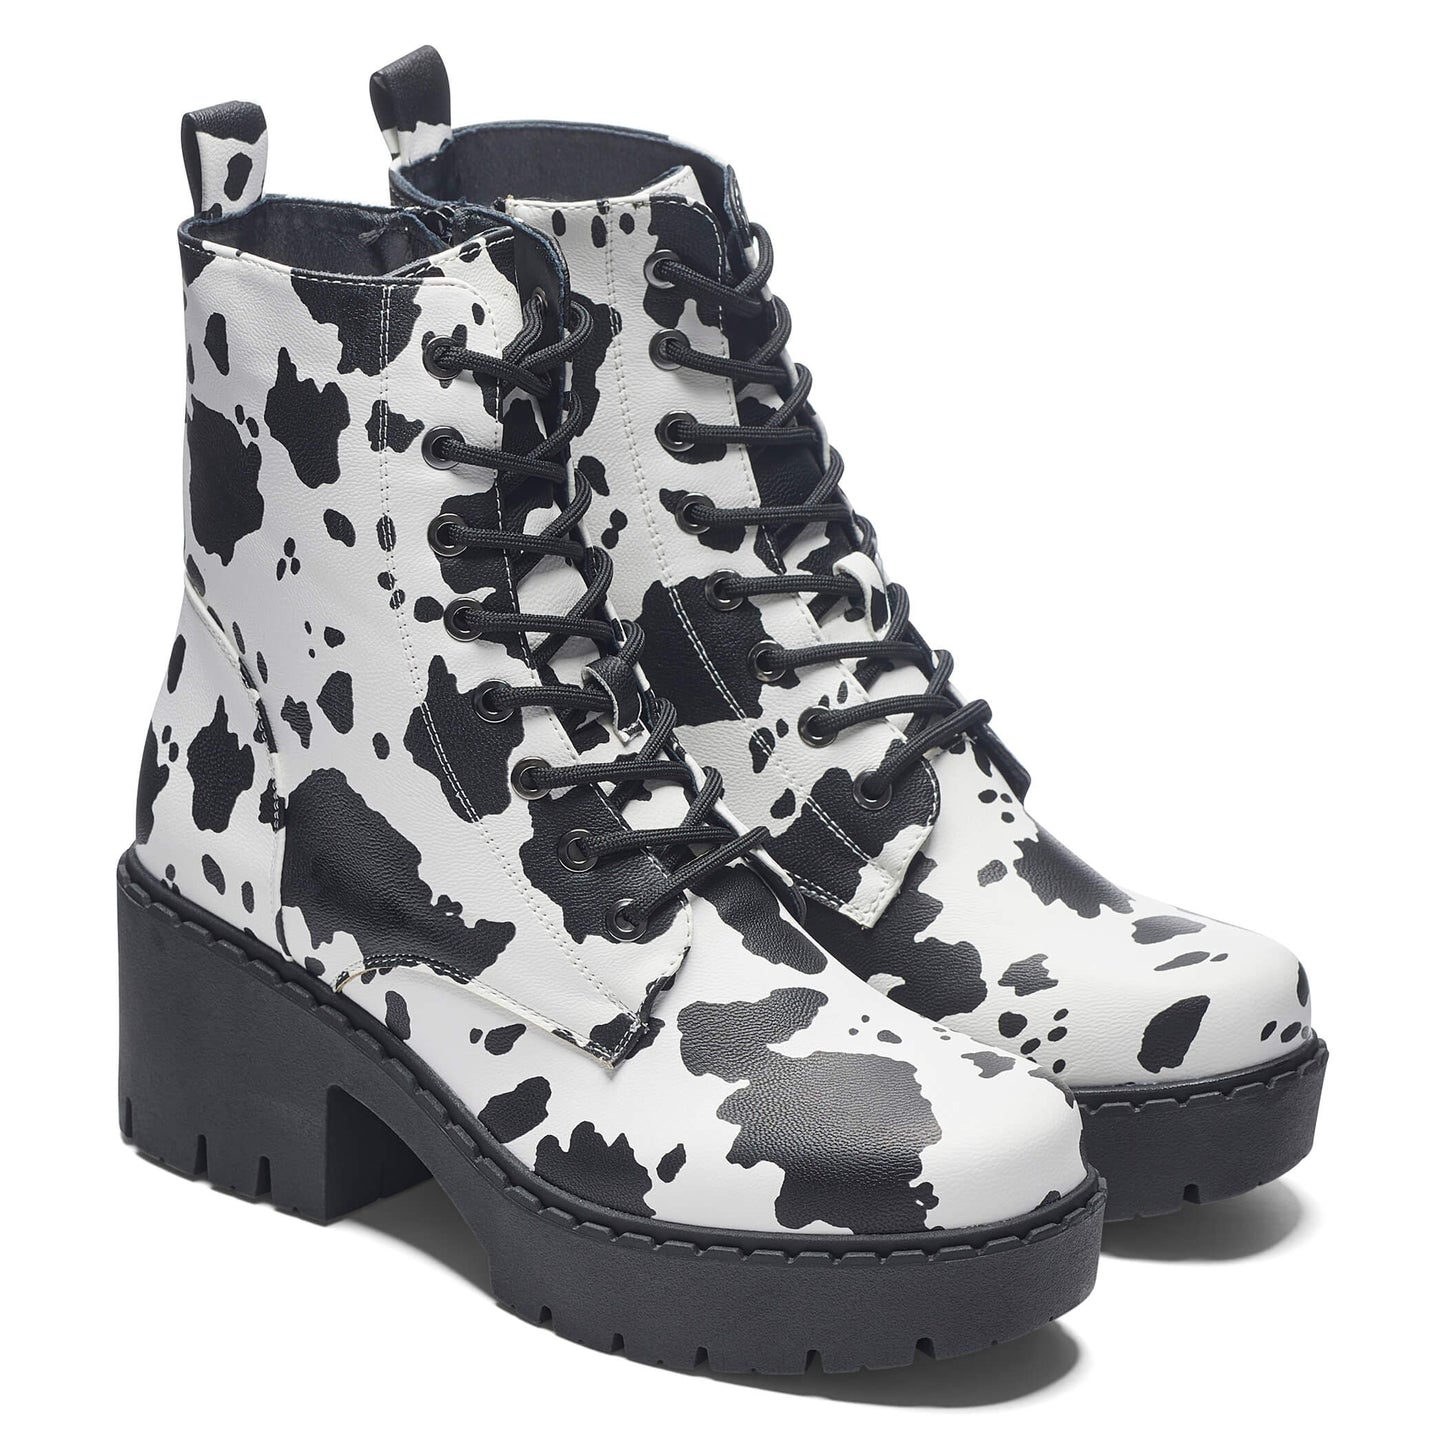 Daisy Cow Print Switch Lace Up Boots - Ankle Boots - KOI Footwear - Black - Three-Quarter View